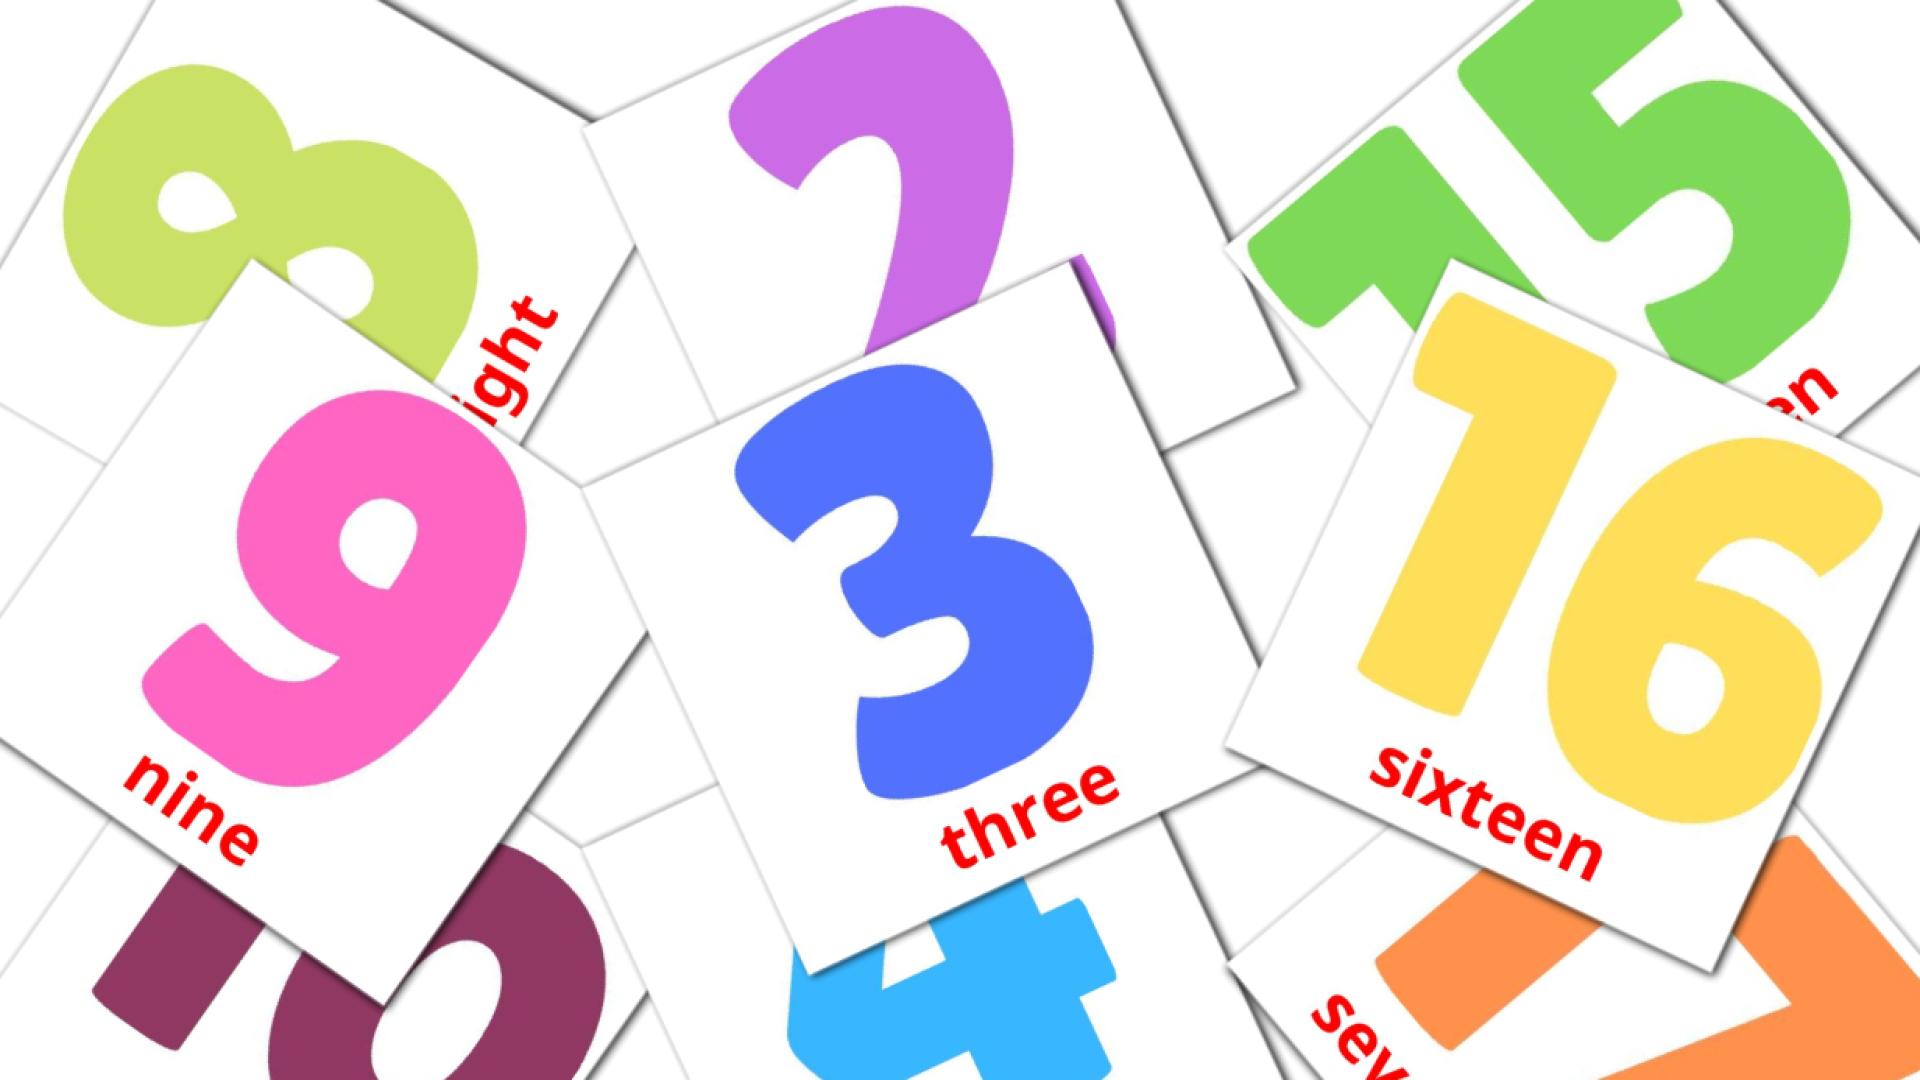 20 Numbers (1-20) flashcards